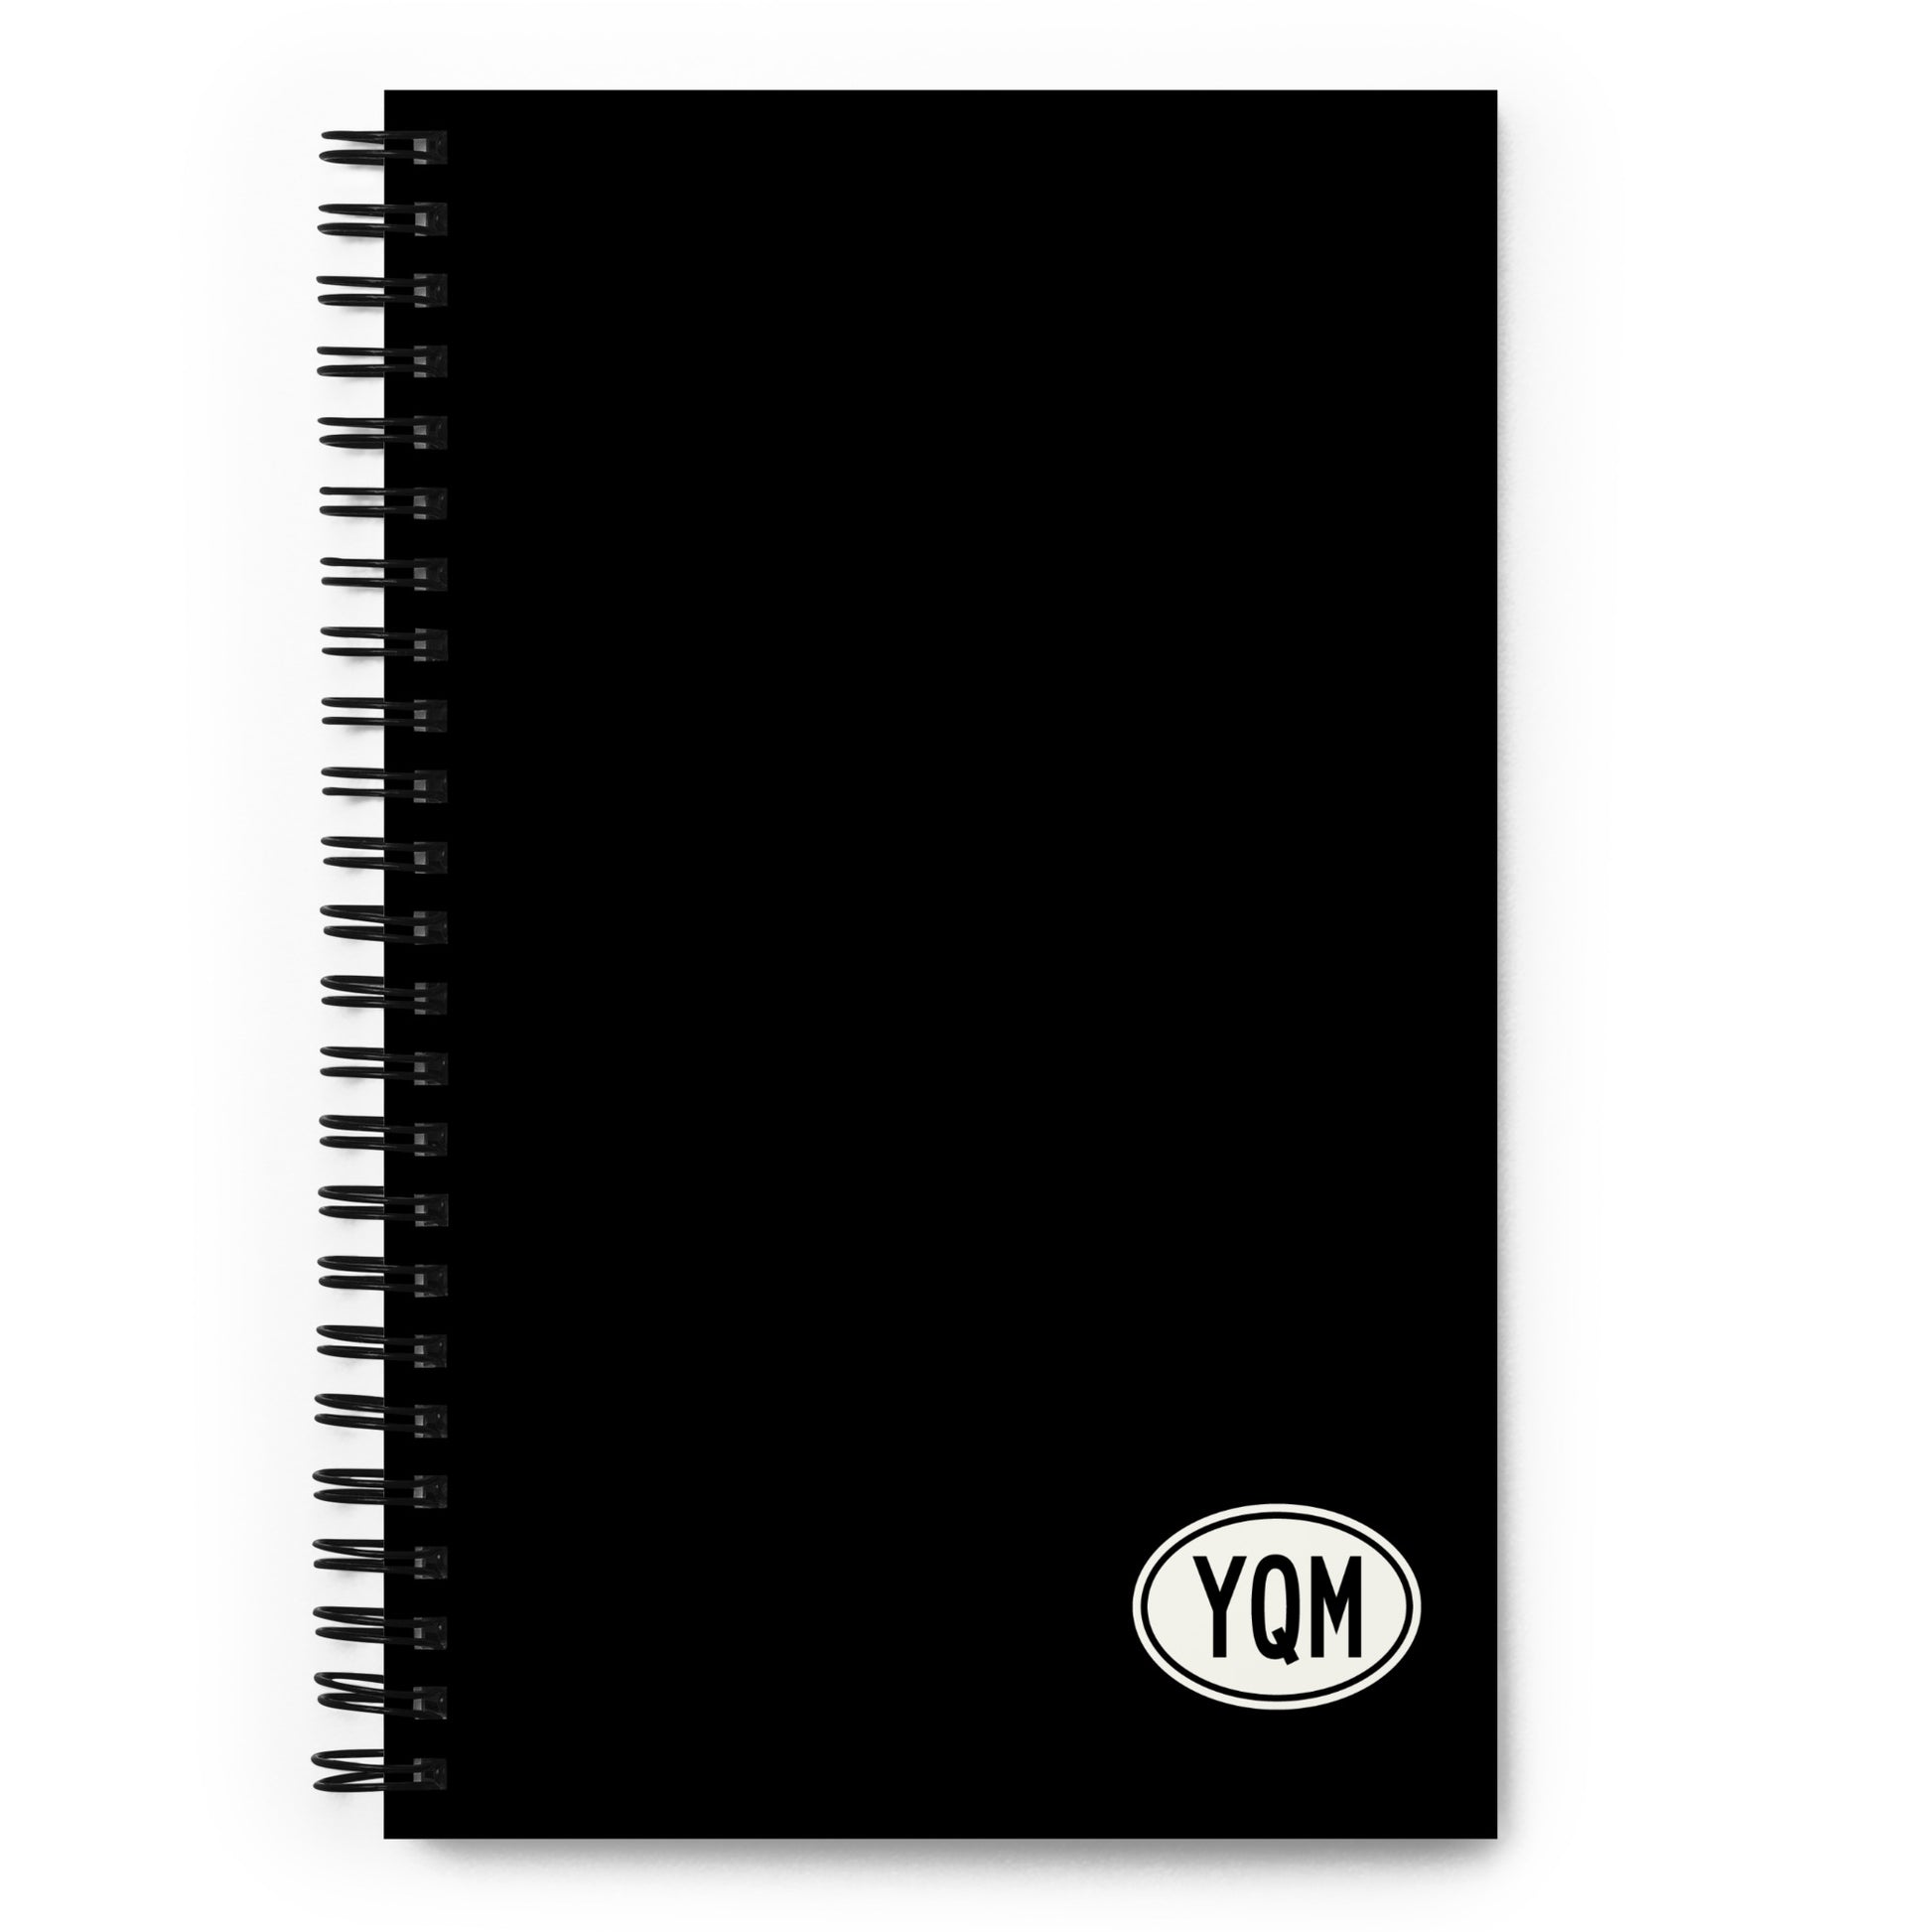 Unique Travel Gift Spiral Notebook - White Oval • YQM Moncton • YHM Designs - Image 01